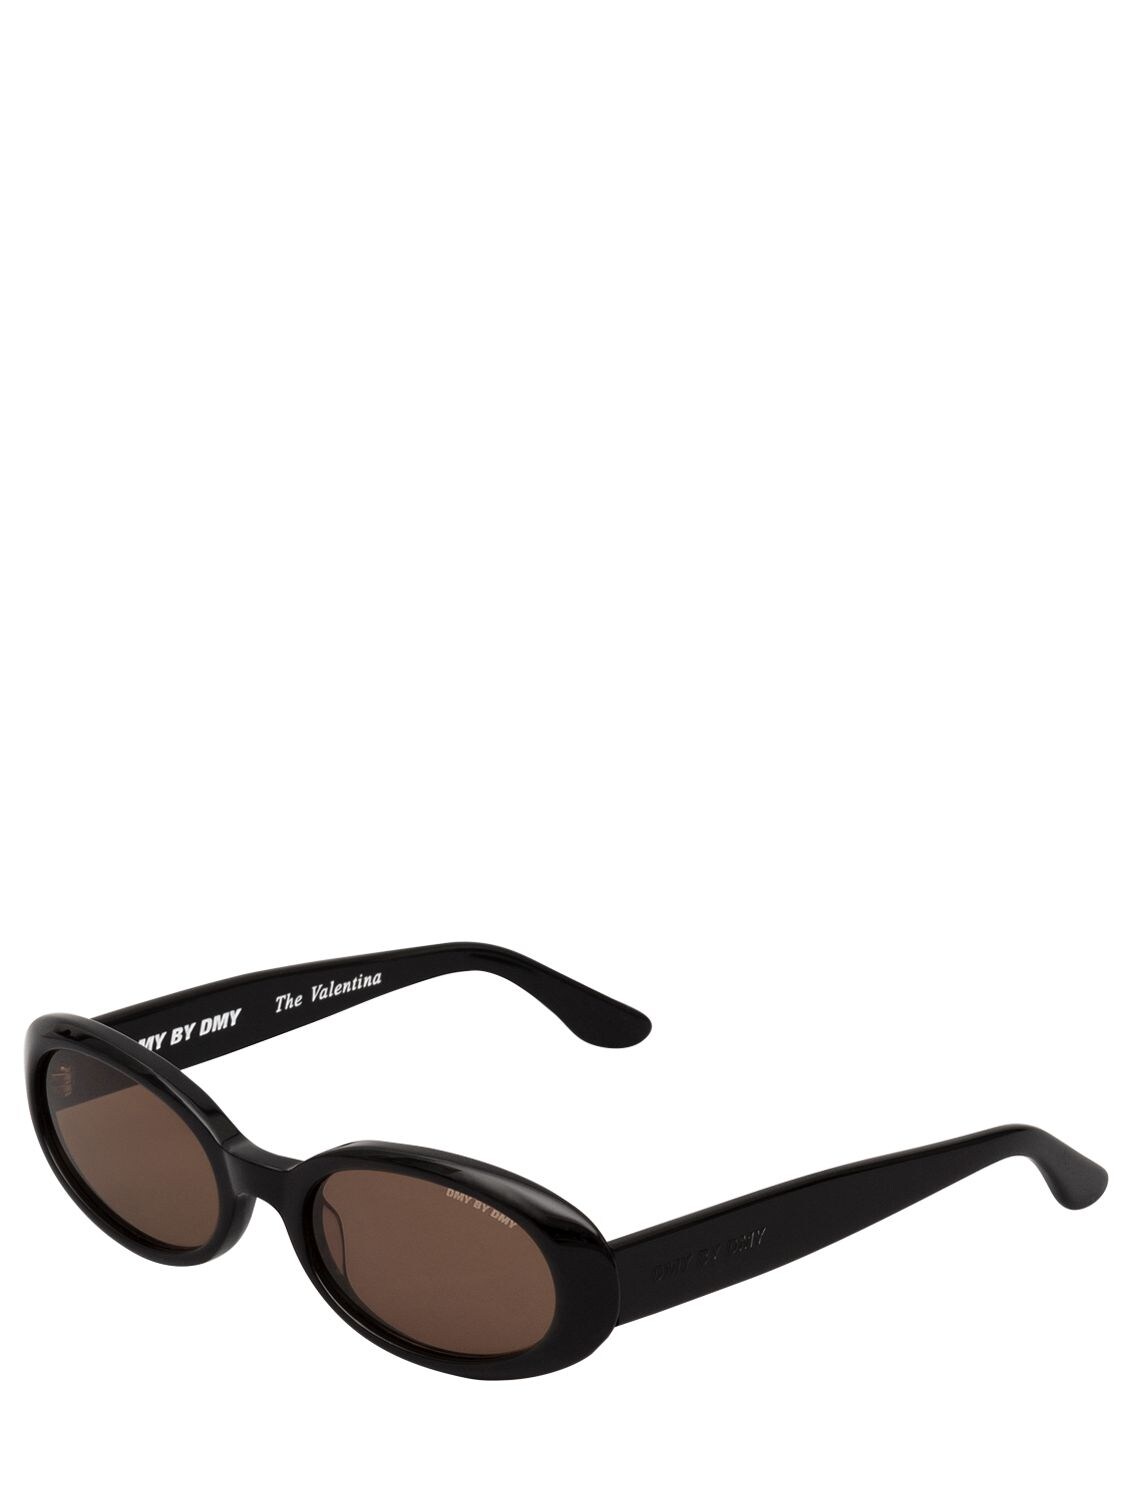 Shop Dmy By Dmy Valentina Oval Acetate Sunglasses In Black,brown